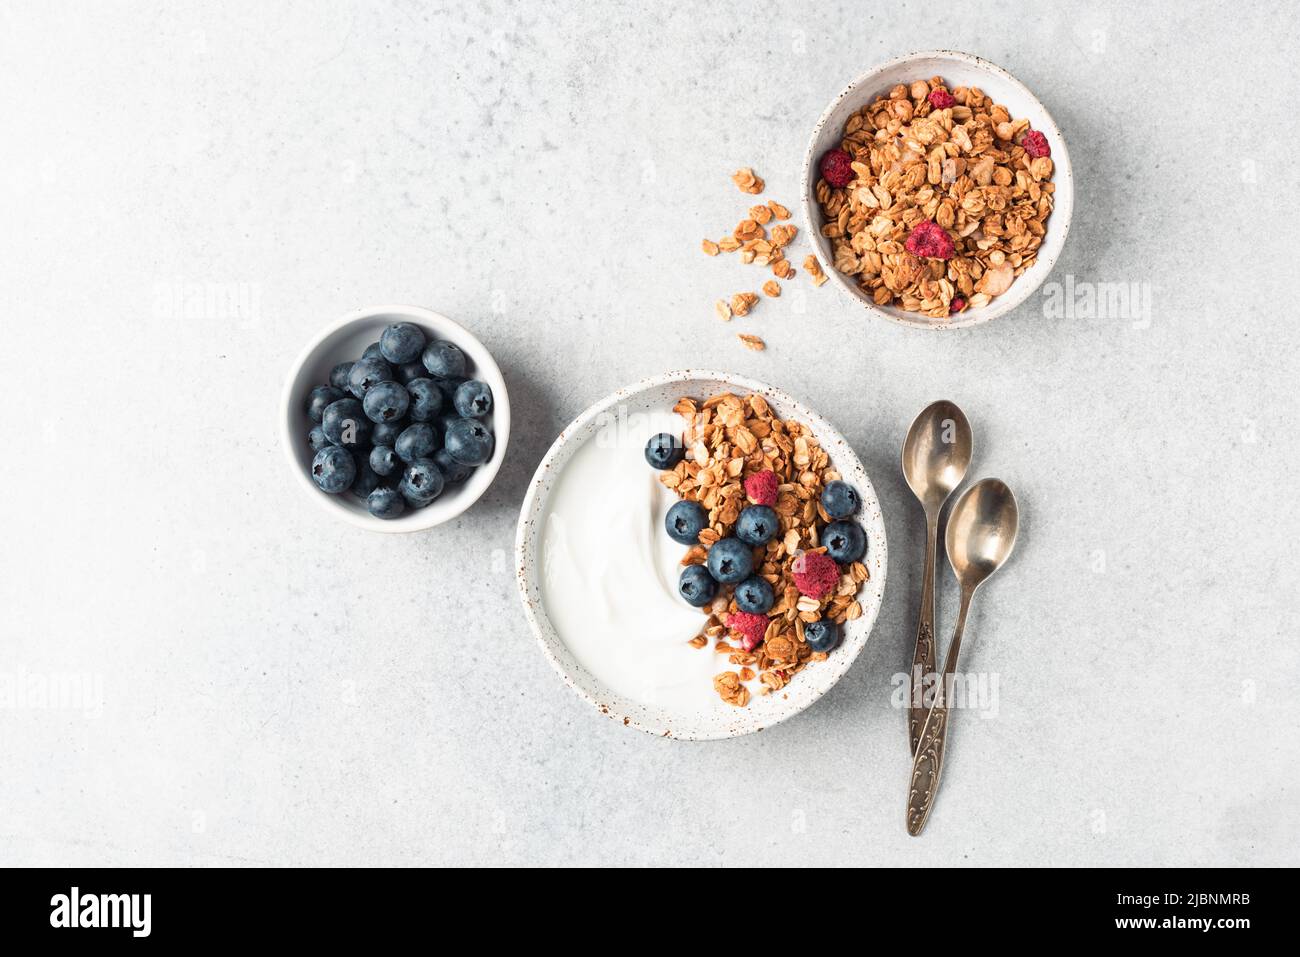 Greek yogurt bowl with granola and berries on grey concrete table background, top view, copy space for text or design elements Stock Photo